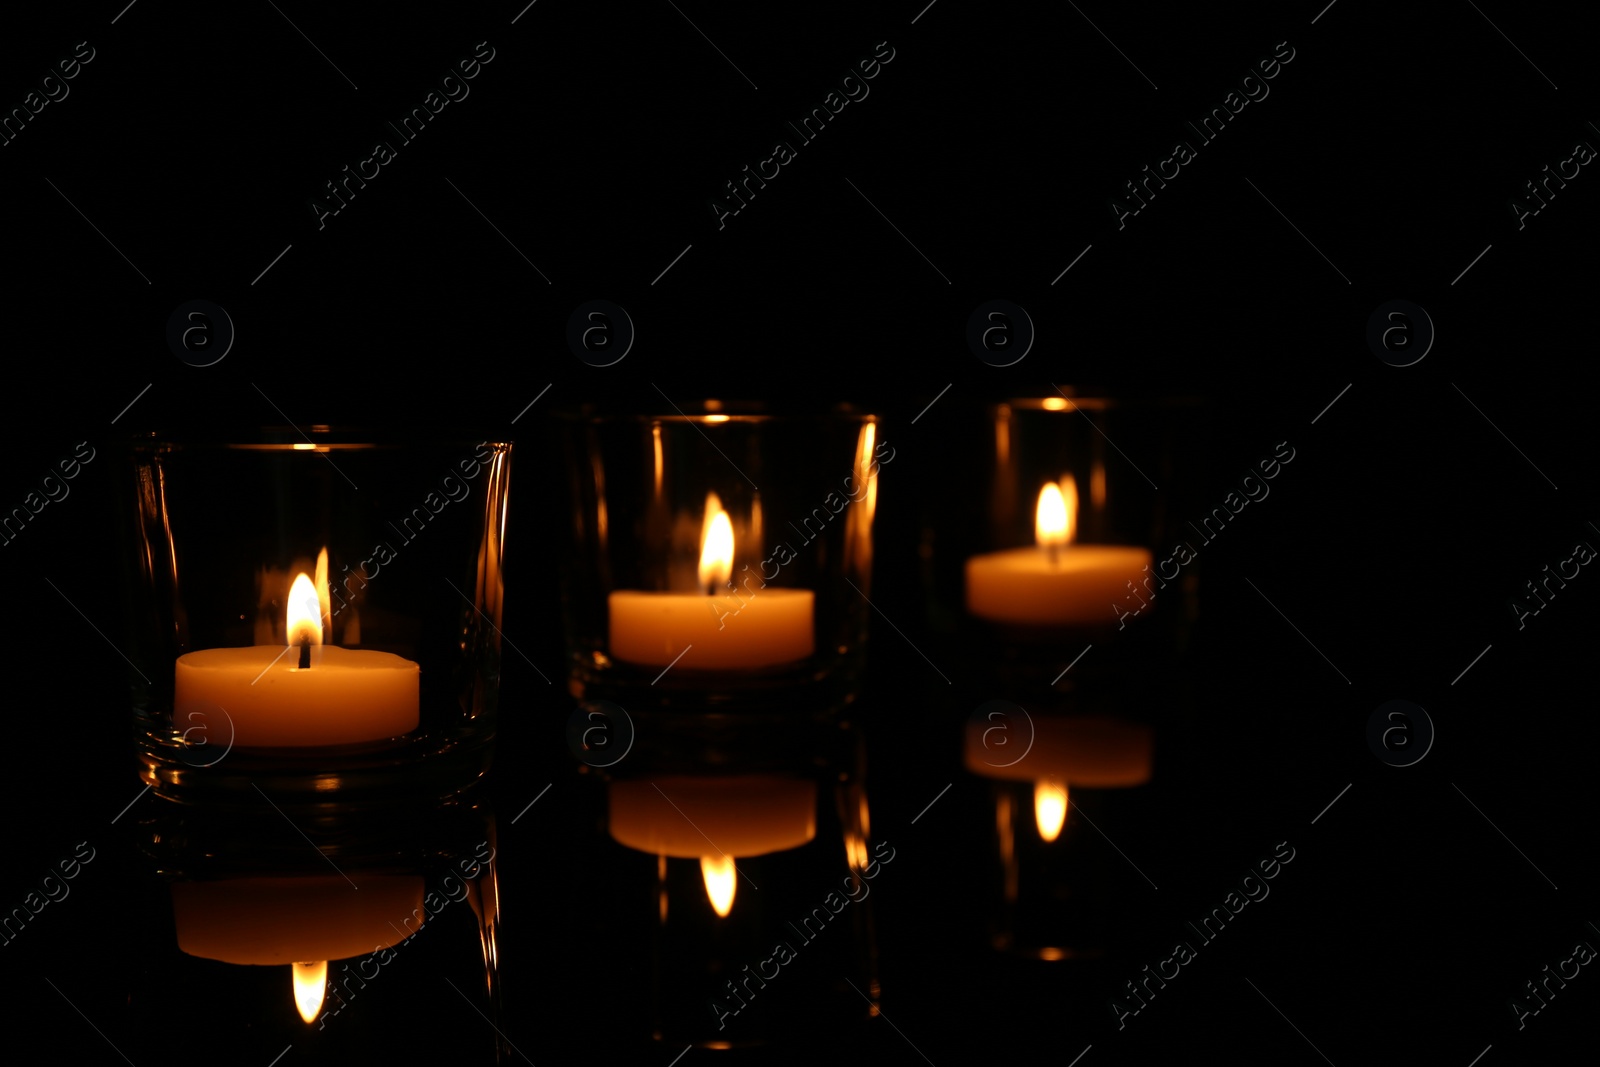 Photo of Burning candles in glass holders on table against dark background